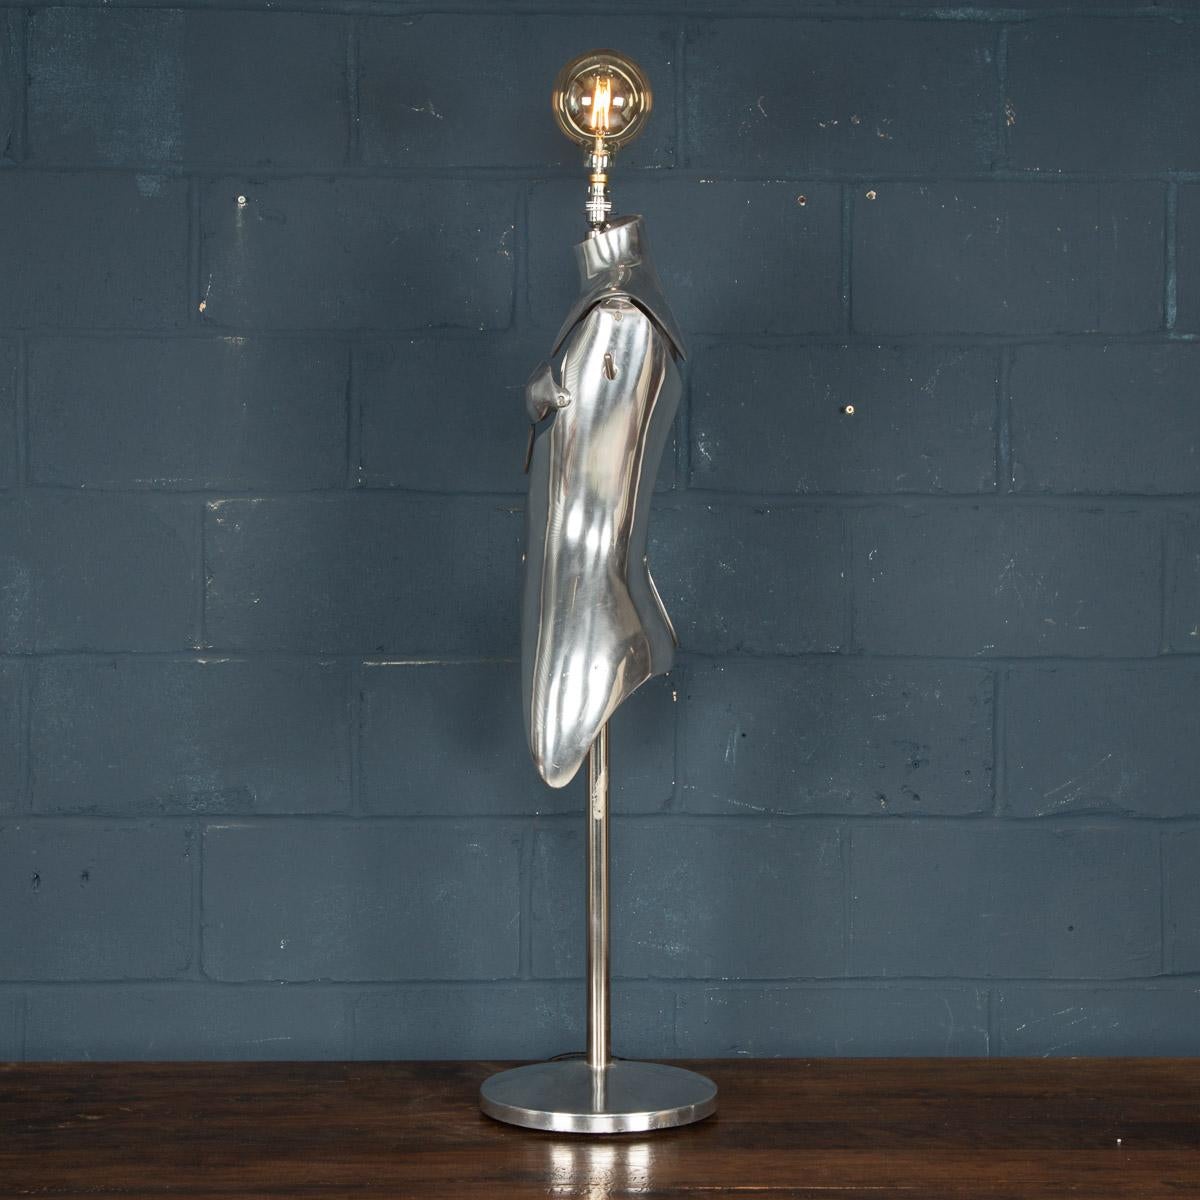 A stylish mannequin lamp designed by Nigel Coates, made for Jigsaw Clothing Company, Knightsbridge, London. Made in aluminium with sectional constructed torsos, these are some of the most striking design of mannequin ever made. They adorned the